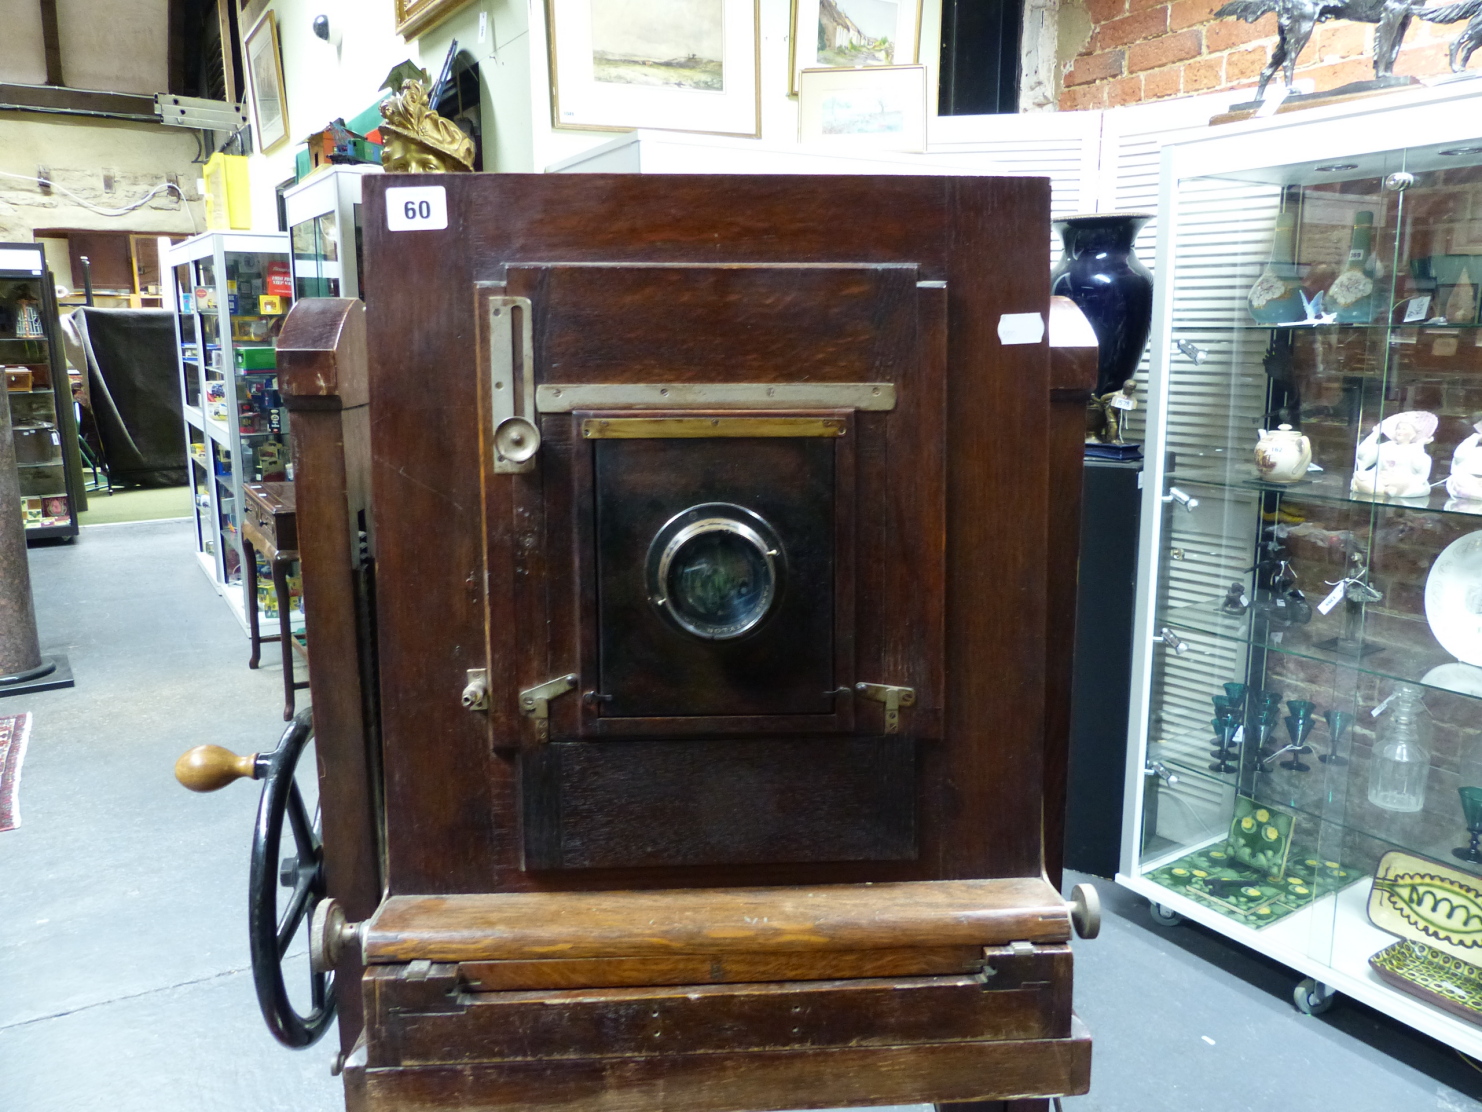 AN EARLY 20th.C.PHOTOGRAPHIC STUDIO PORTRAIT FULL PLATE CAMERA ON ADJUSTABLE STAND, LABELLED RAACO - Image 23 of 43